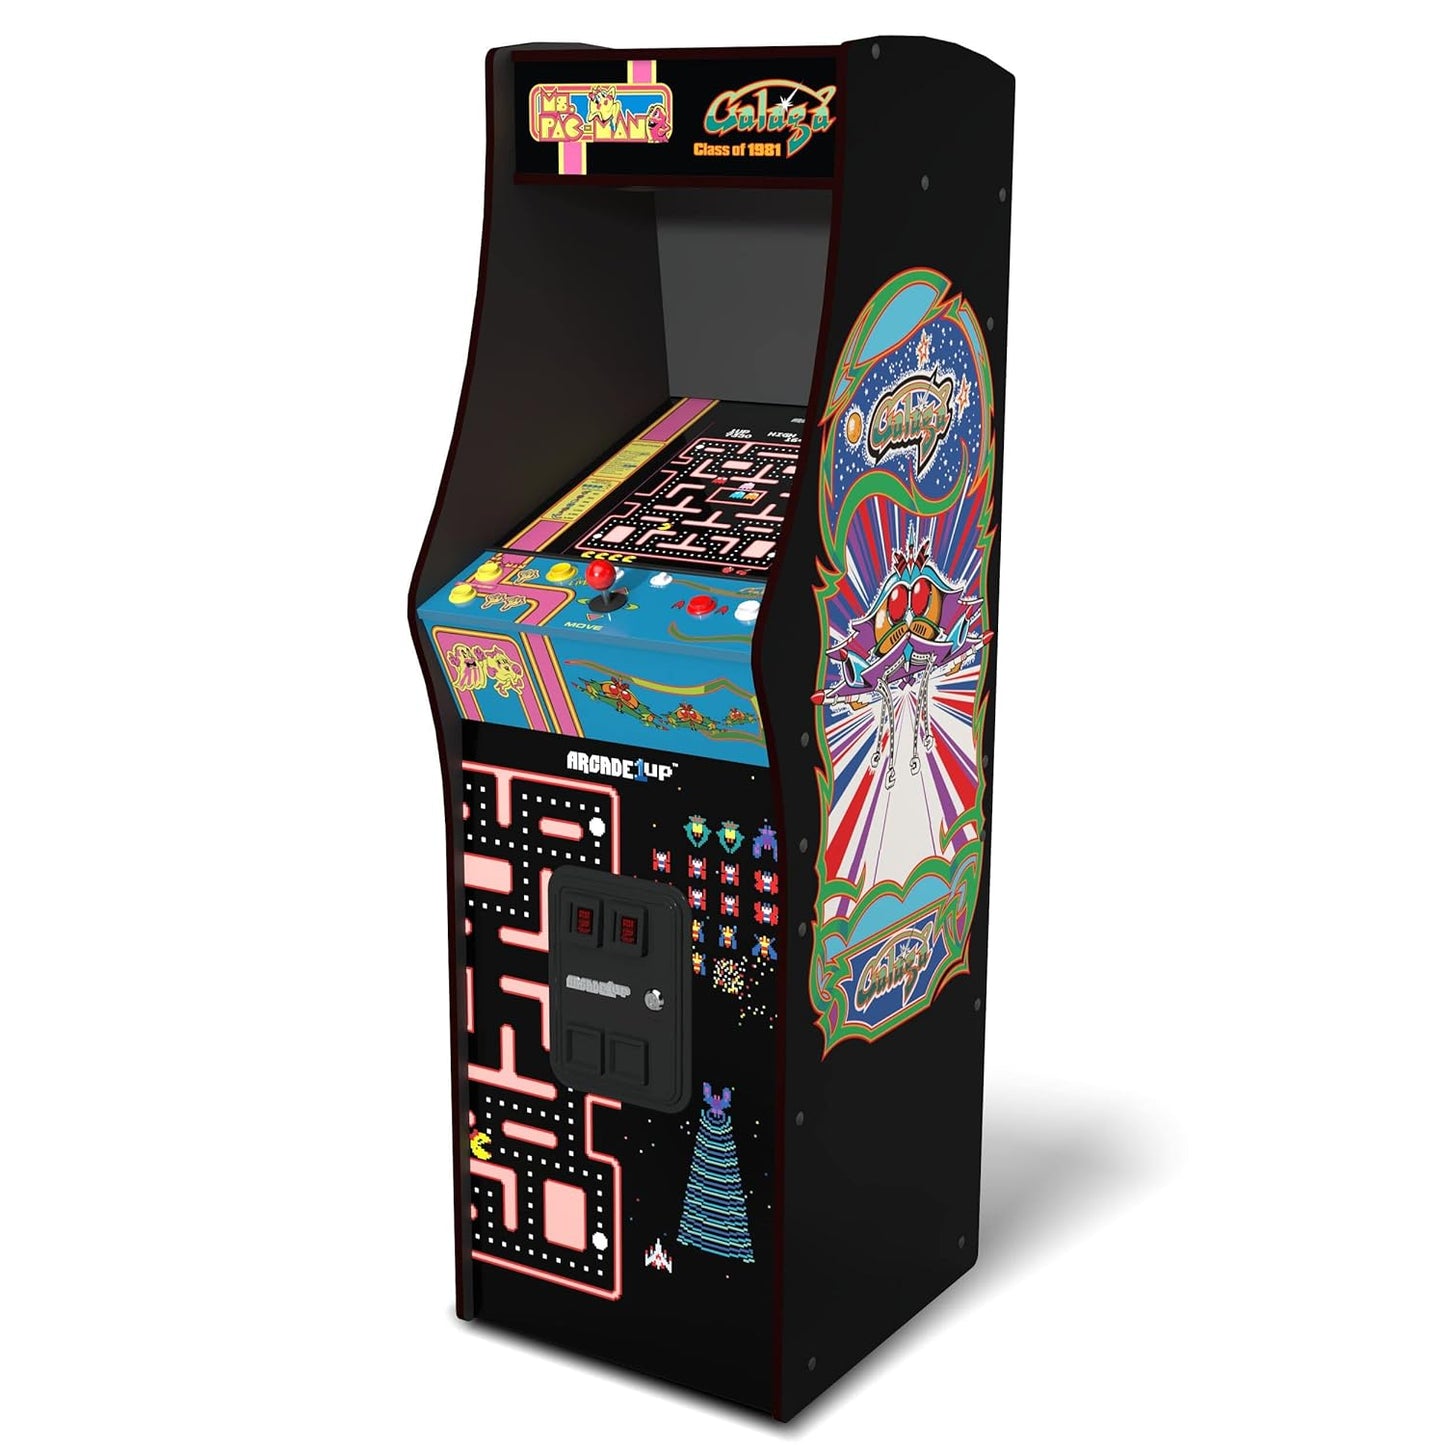 ARCADE1UP Class of 81’ Deluxe Arcade Machine for Home - 5 Feet Tall - 12 Classic Games